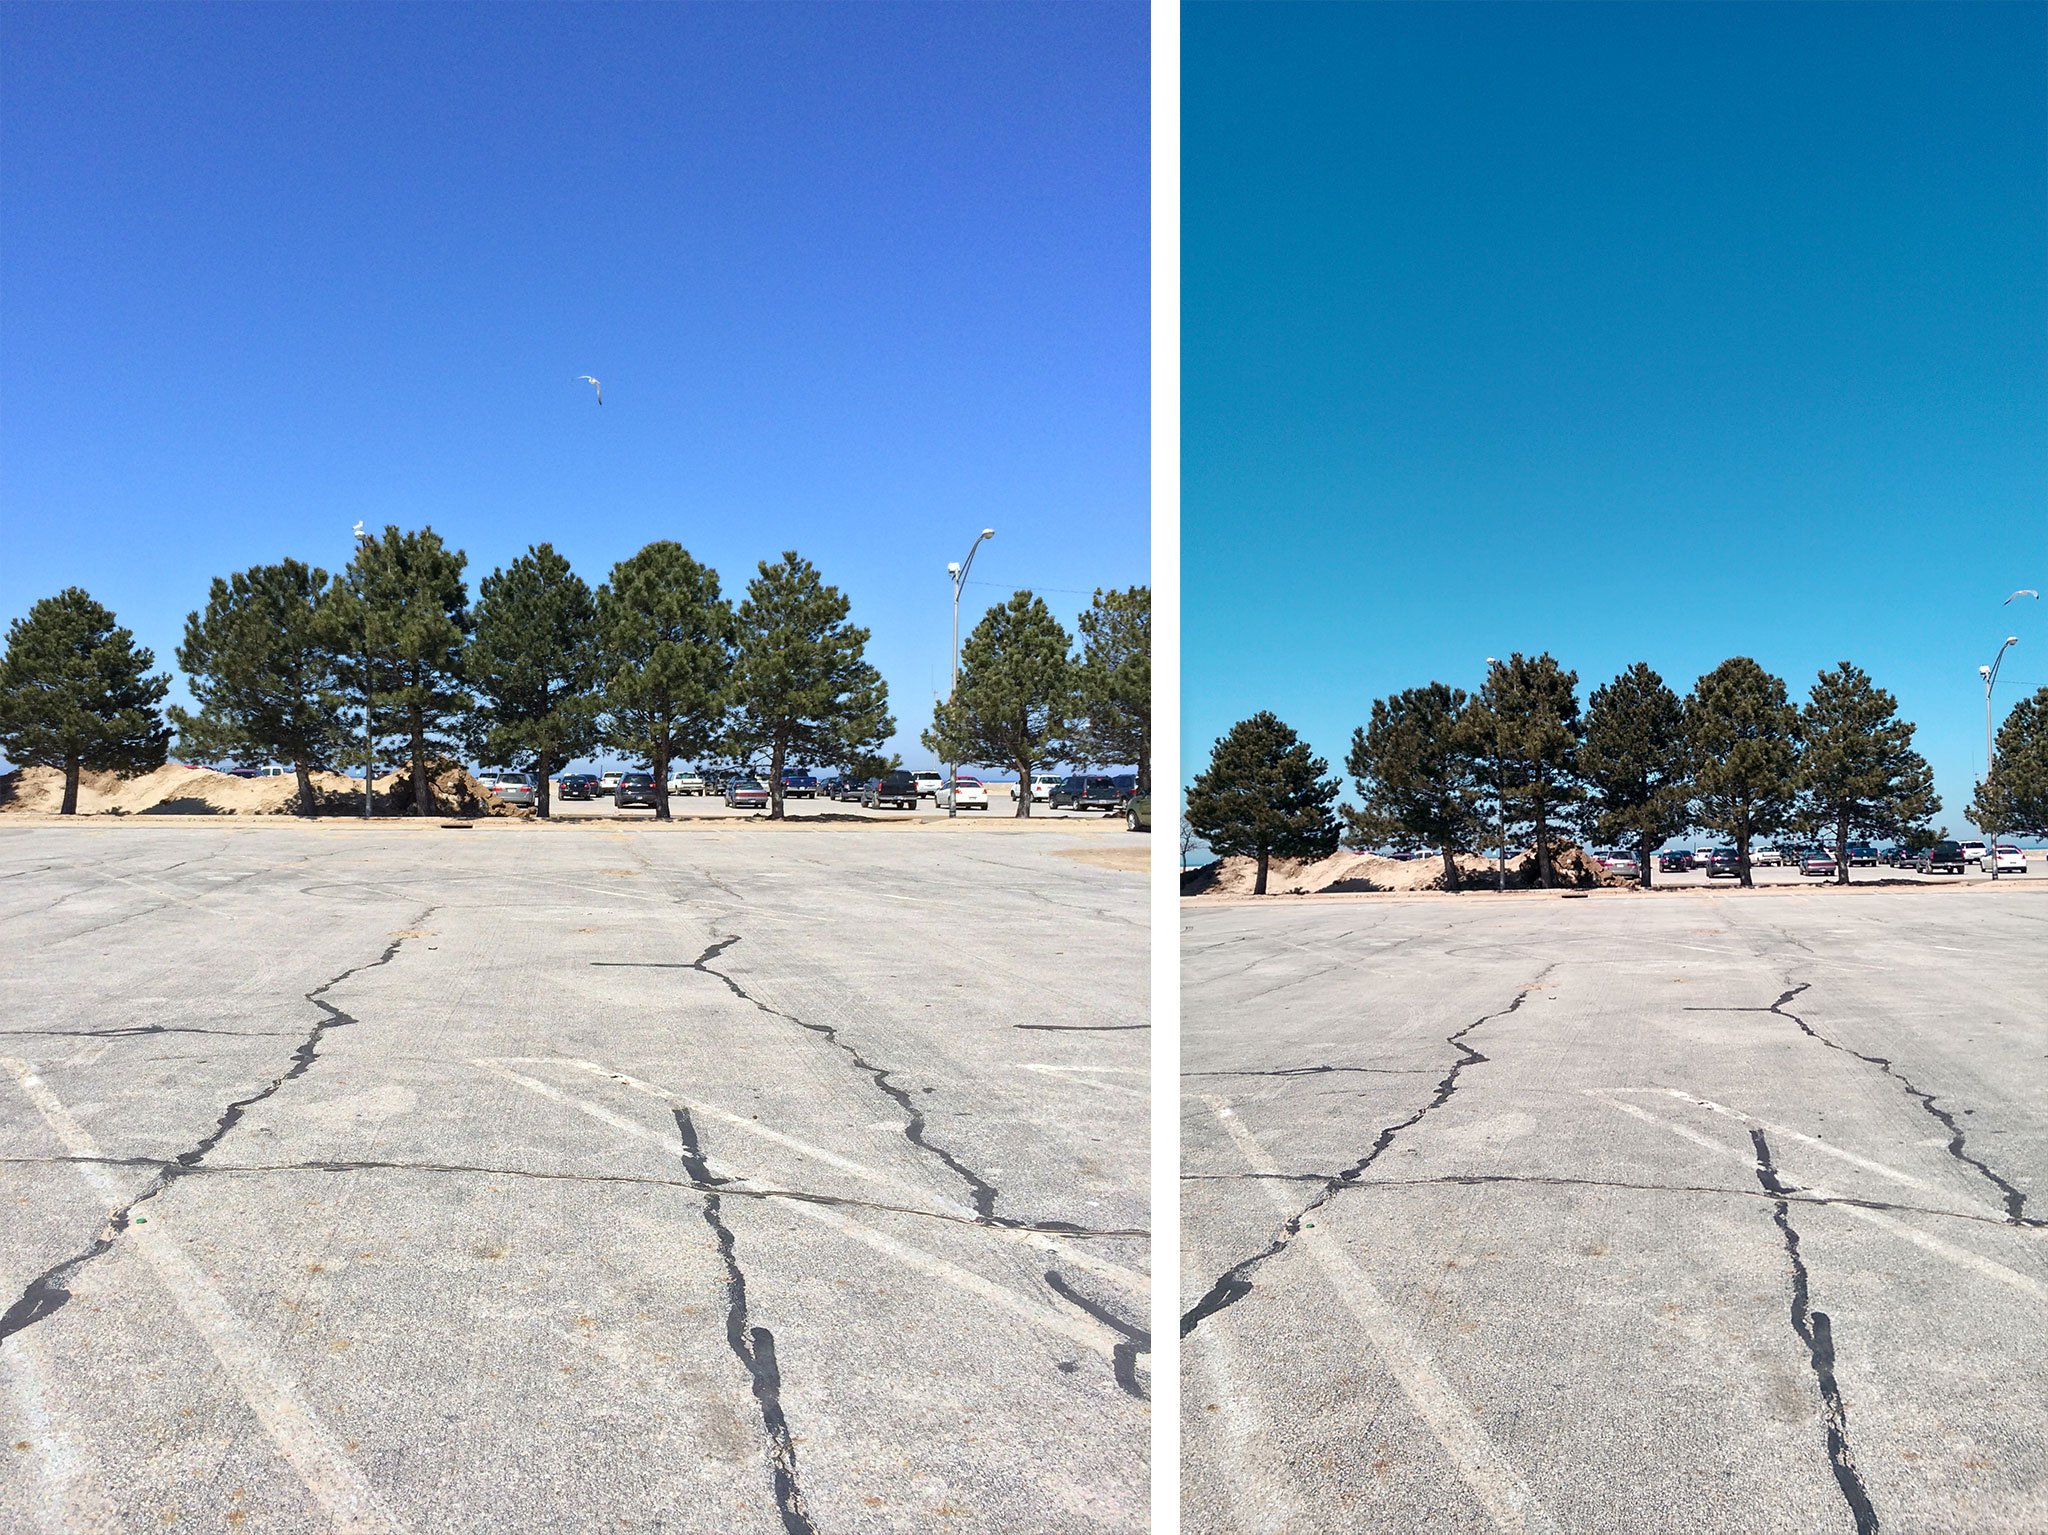 HTC One M8 vs. iPhone 5s: HDR